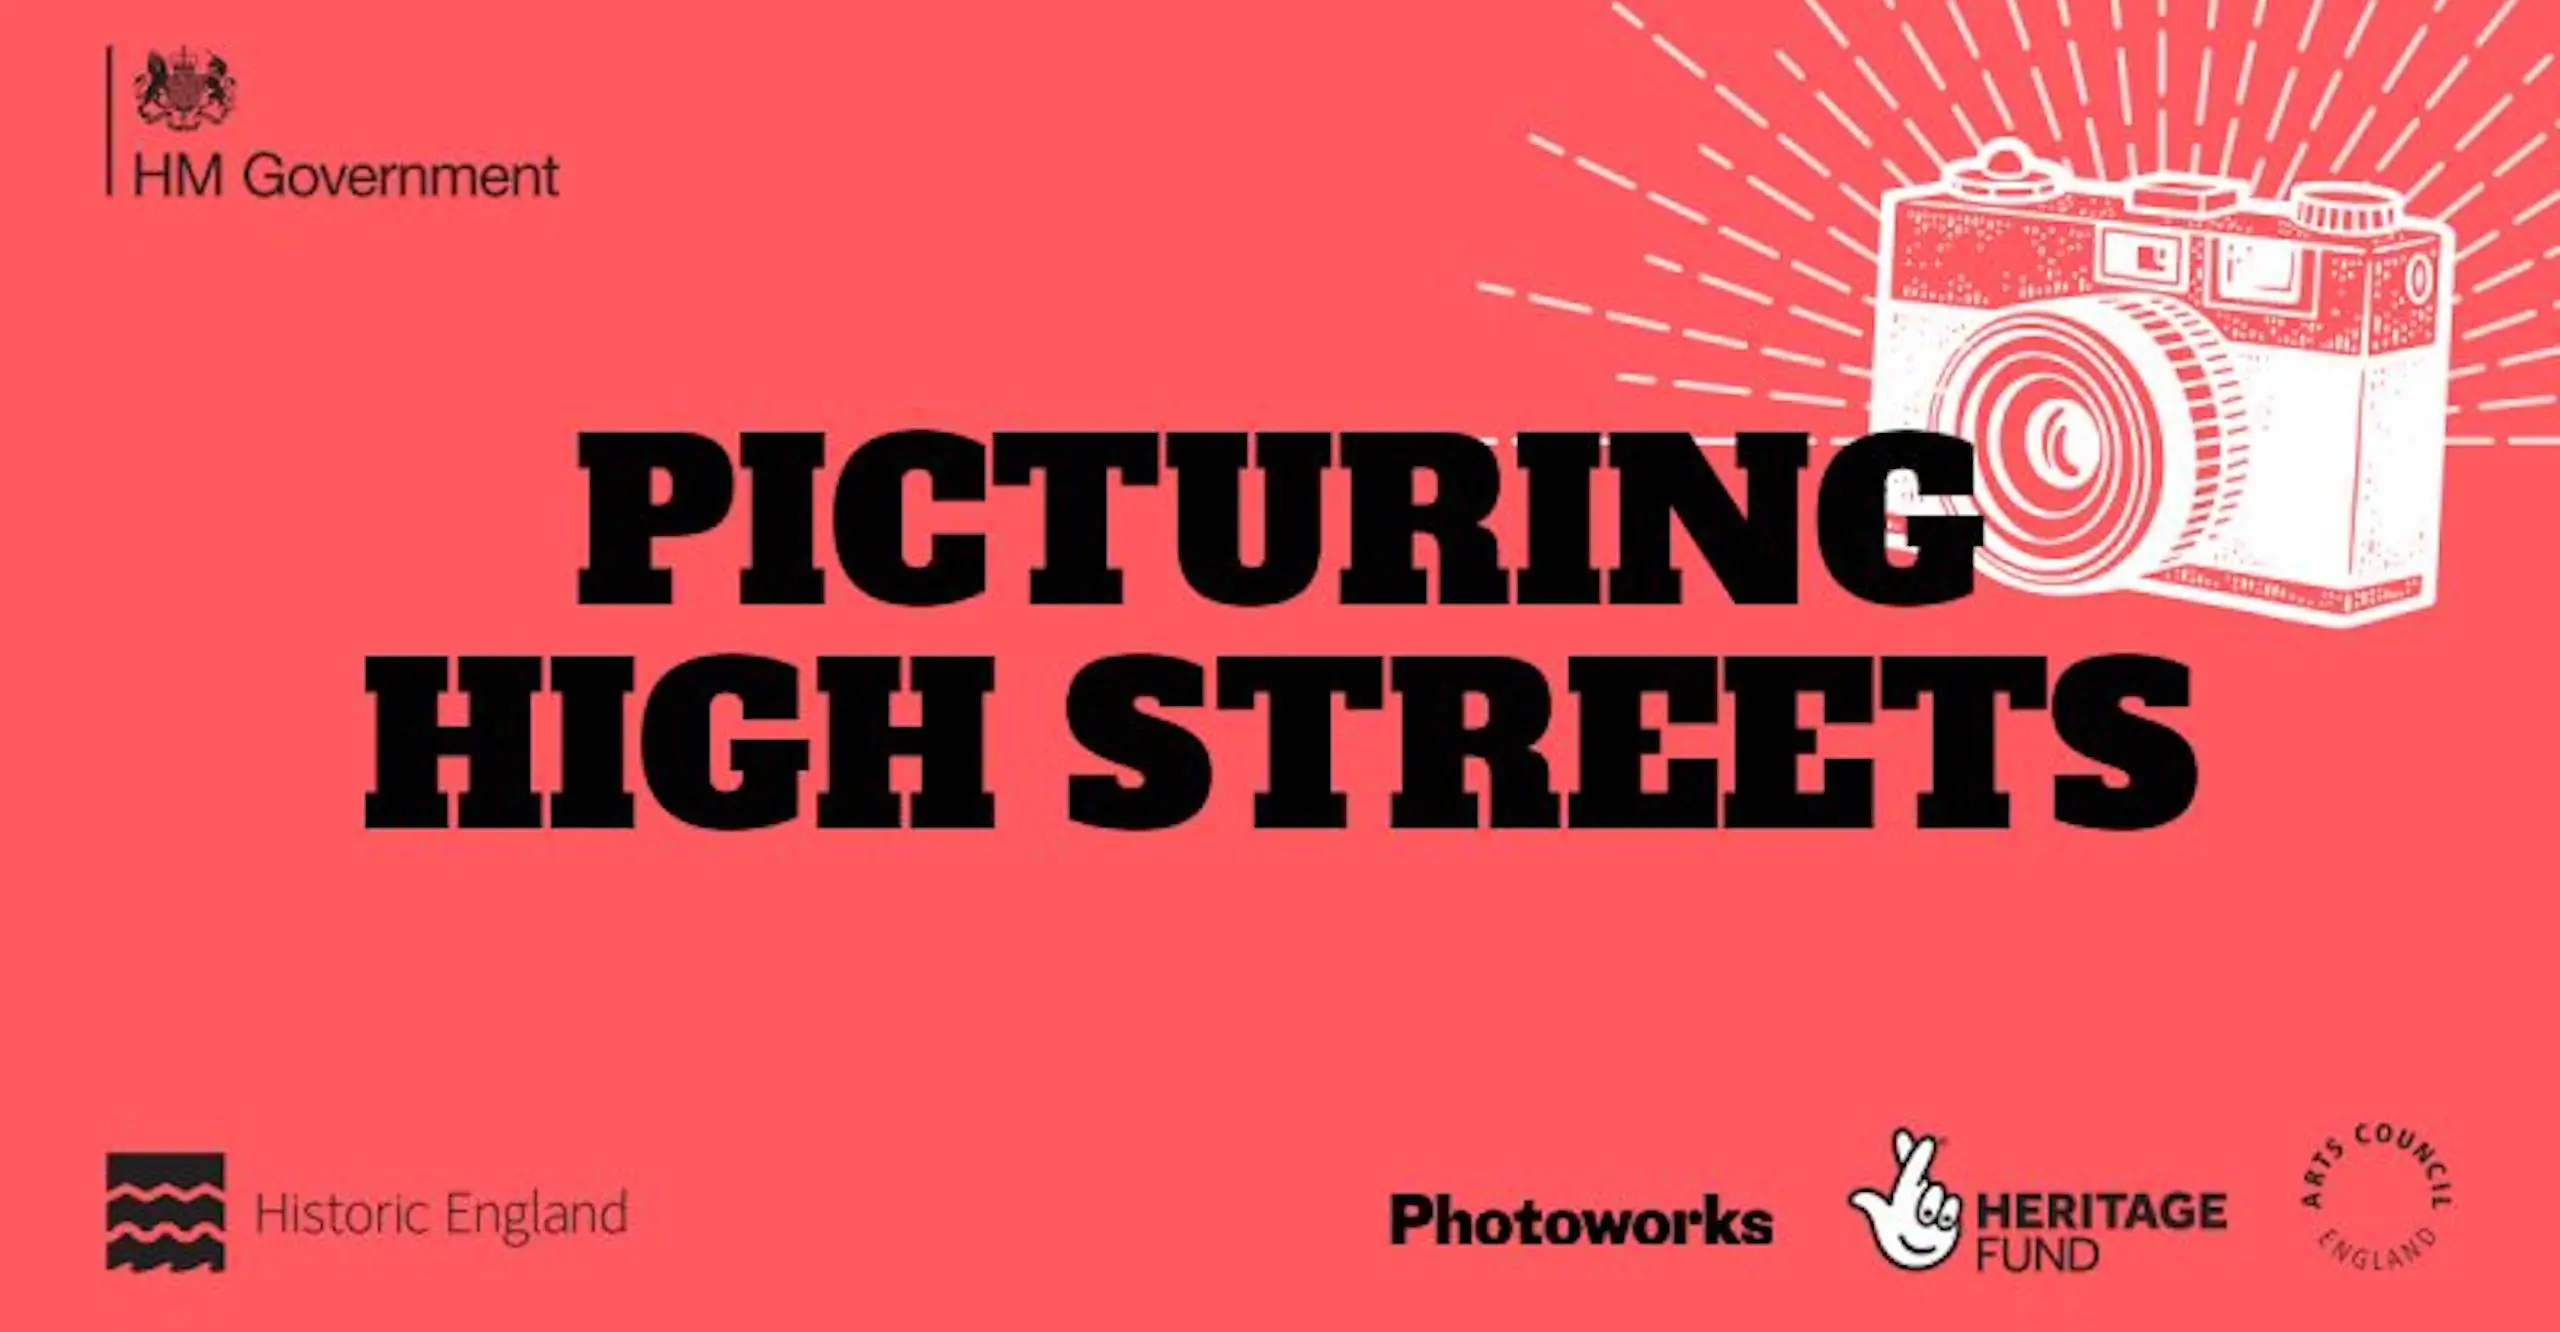 Picturing High Streets title with a graphic of a camera